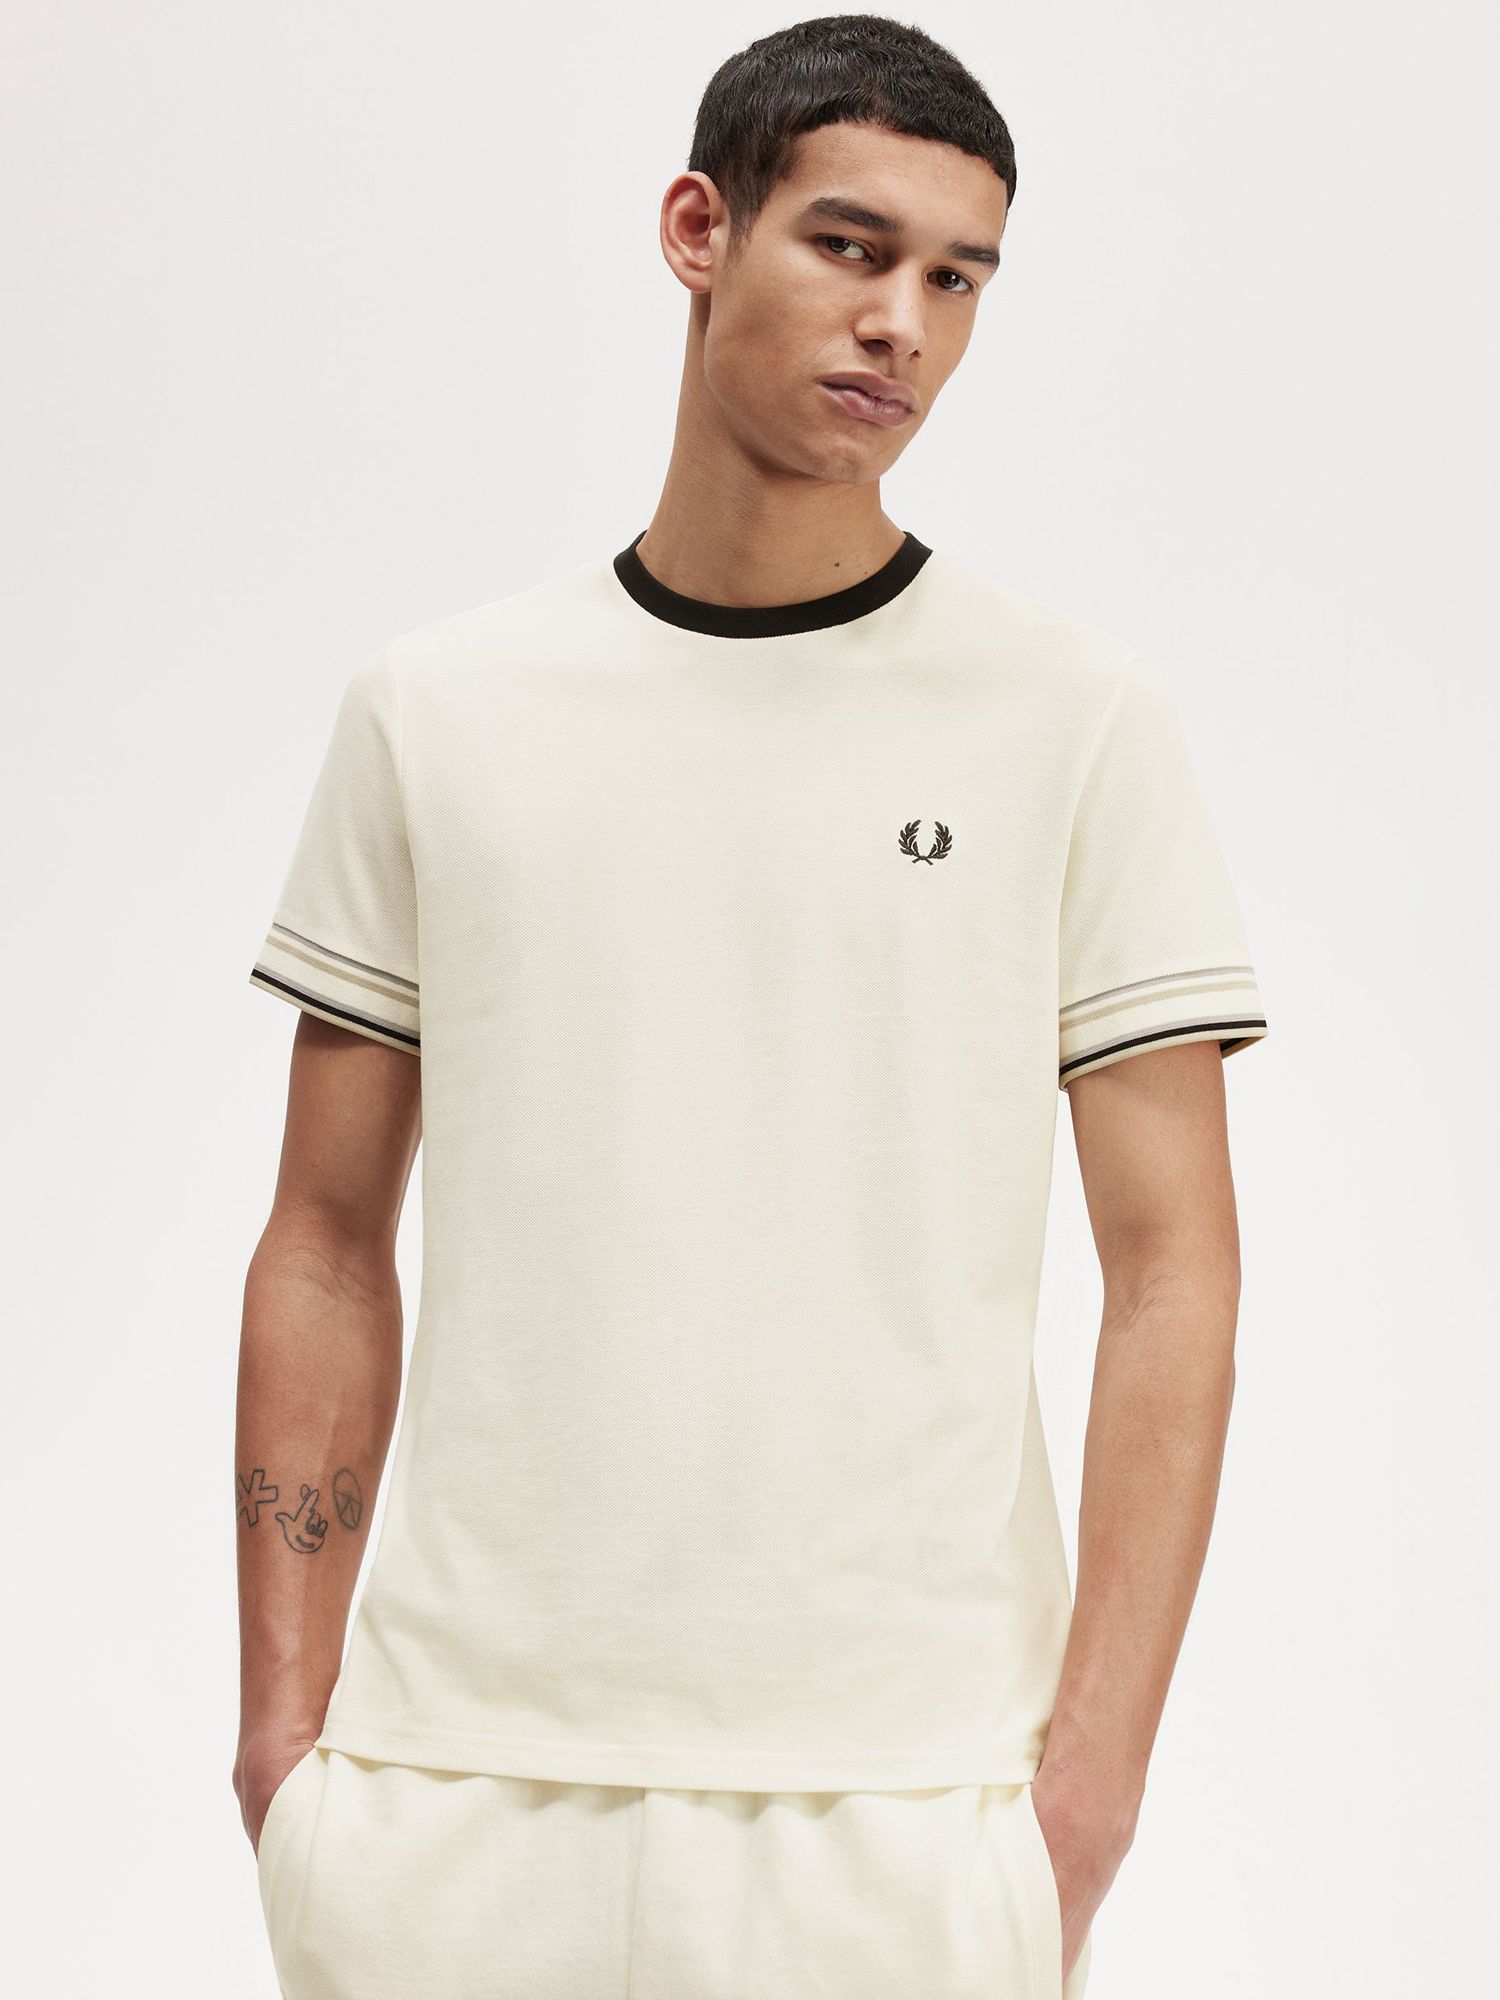 Fred Perry Bold Tipped Piqué T-Shirt, Ecru at John Lewis & Partners